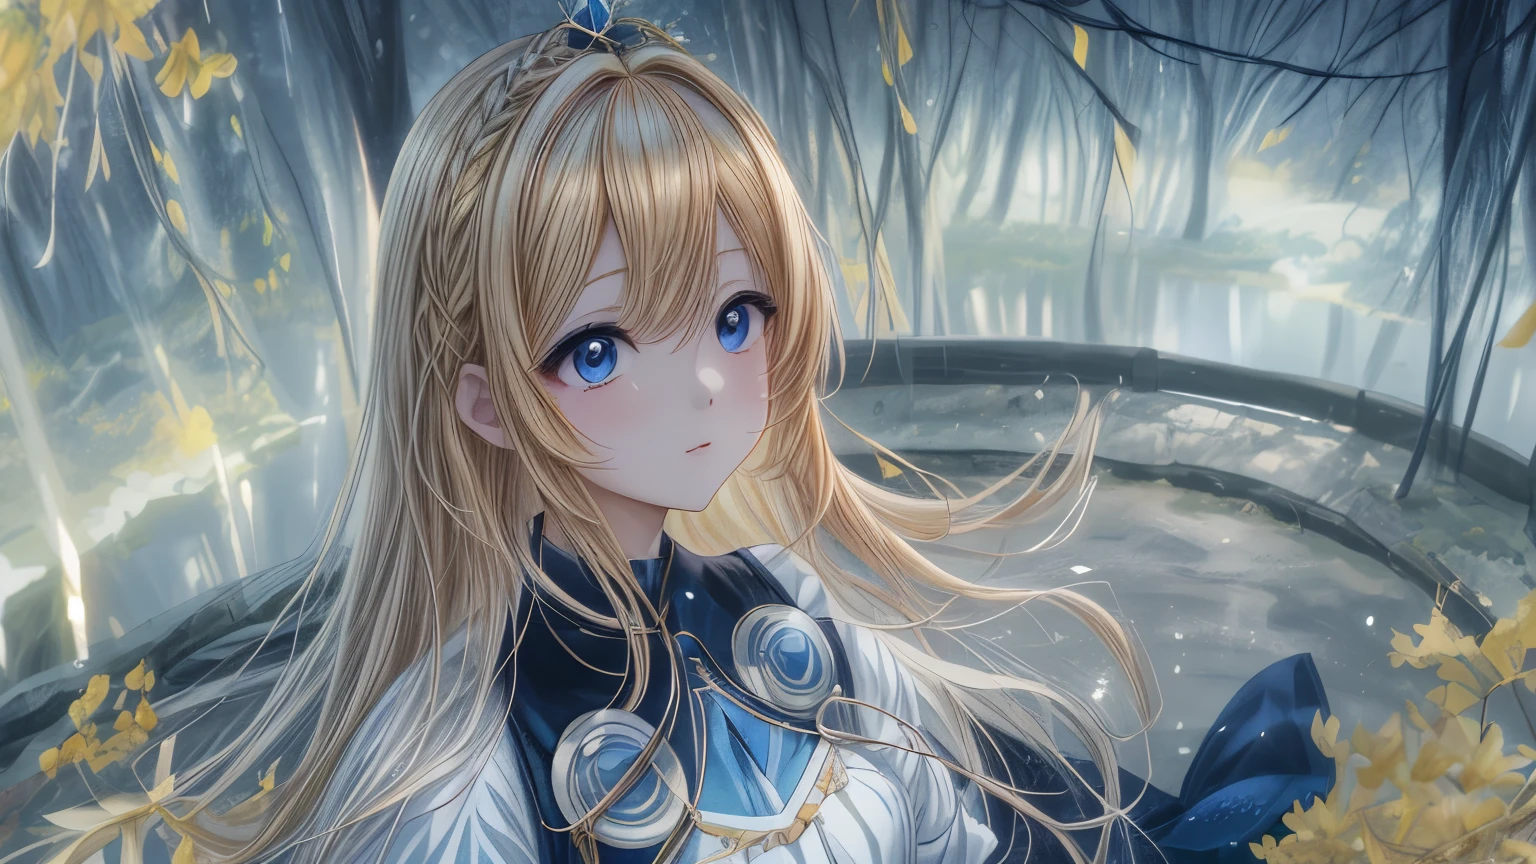 Anime girl with long blonde hair and blue eyes standing in a forest., detailed digital anime art, 4K anime style, hermoso portrait animado, portrait, Knights of the Zodiac, , anime art wallpaper 4k, anime art wallpaper 4k, blonde anime girl with long hair, High quality 8K detailed art, anime art wallpaper 8K, blonde hair princess, detailed anime art